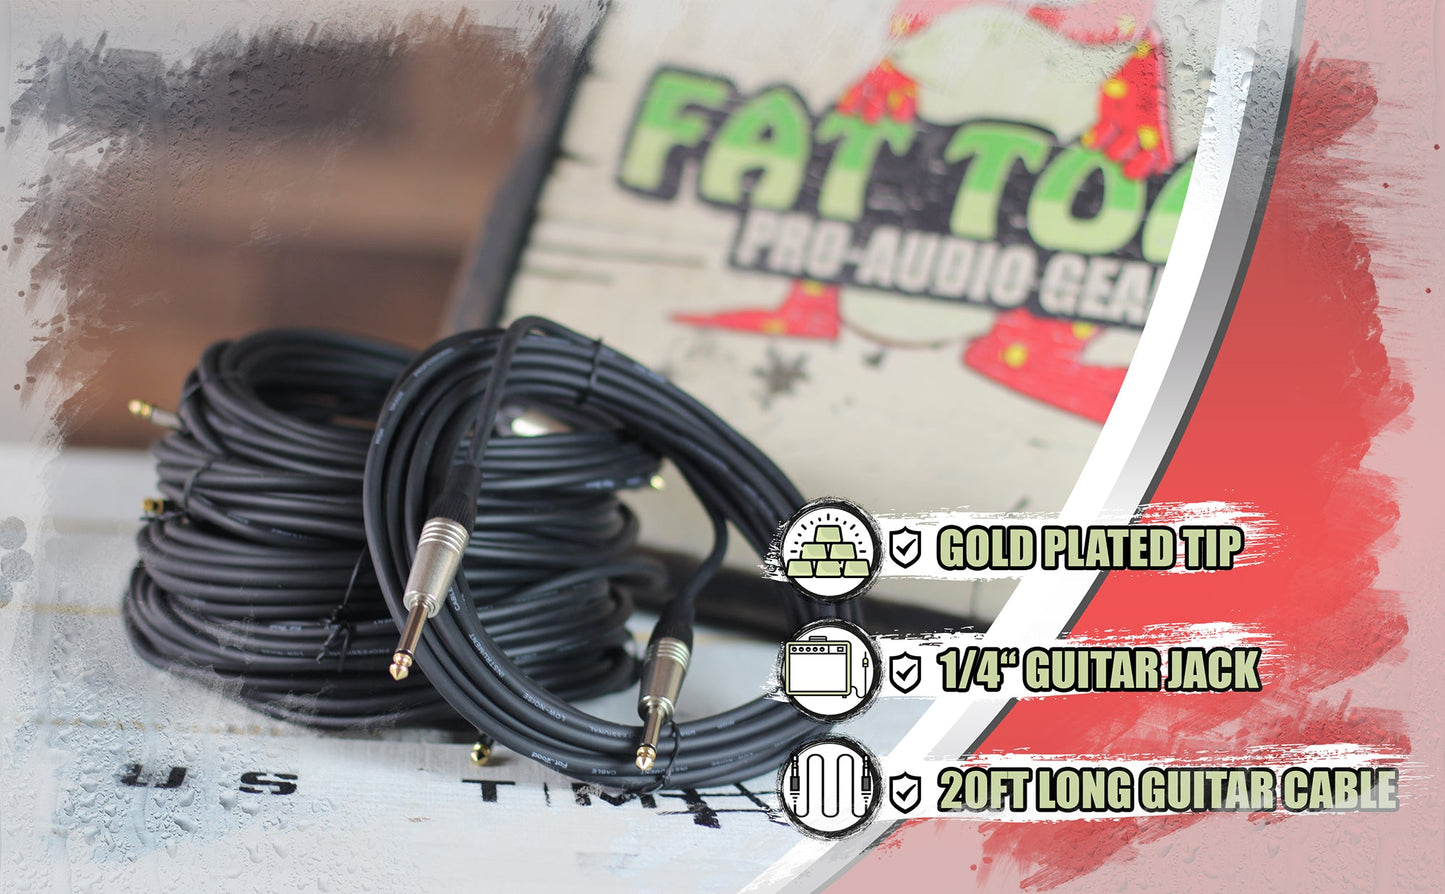 Guitar Cords (6 Pack) Instrument Cable by FAT TOAD - 20FT Wires 1/4 Inch Gold Straight-End